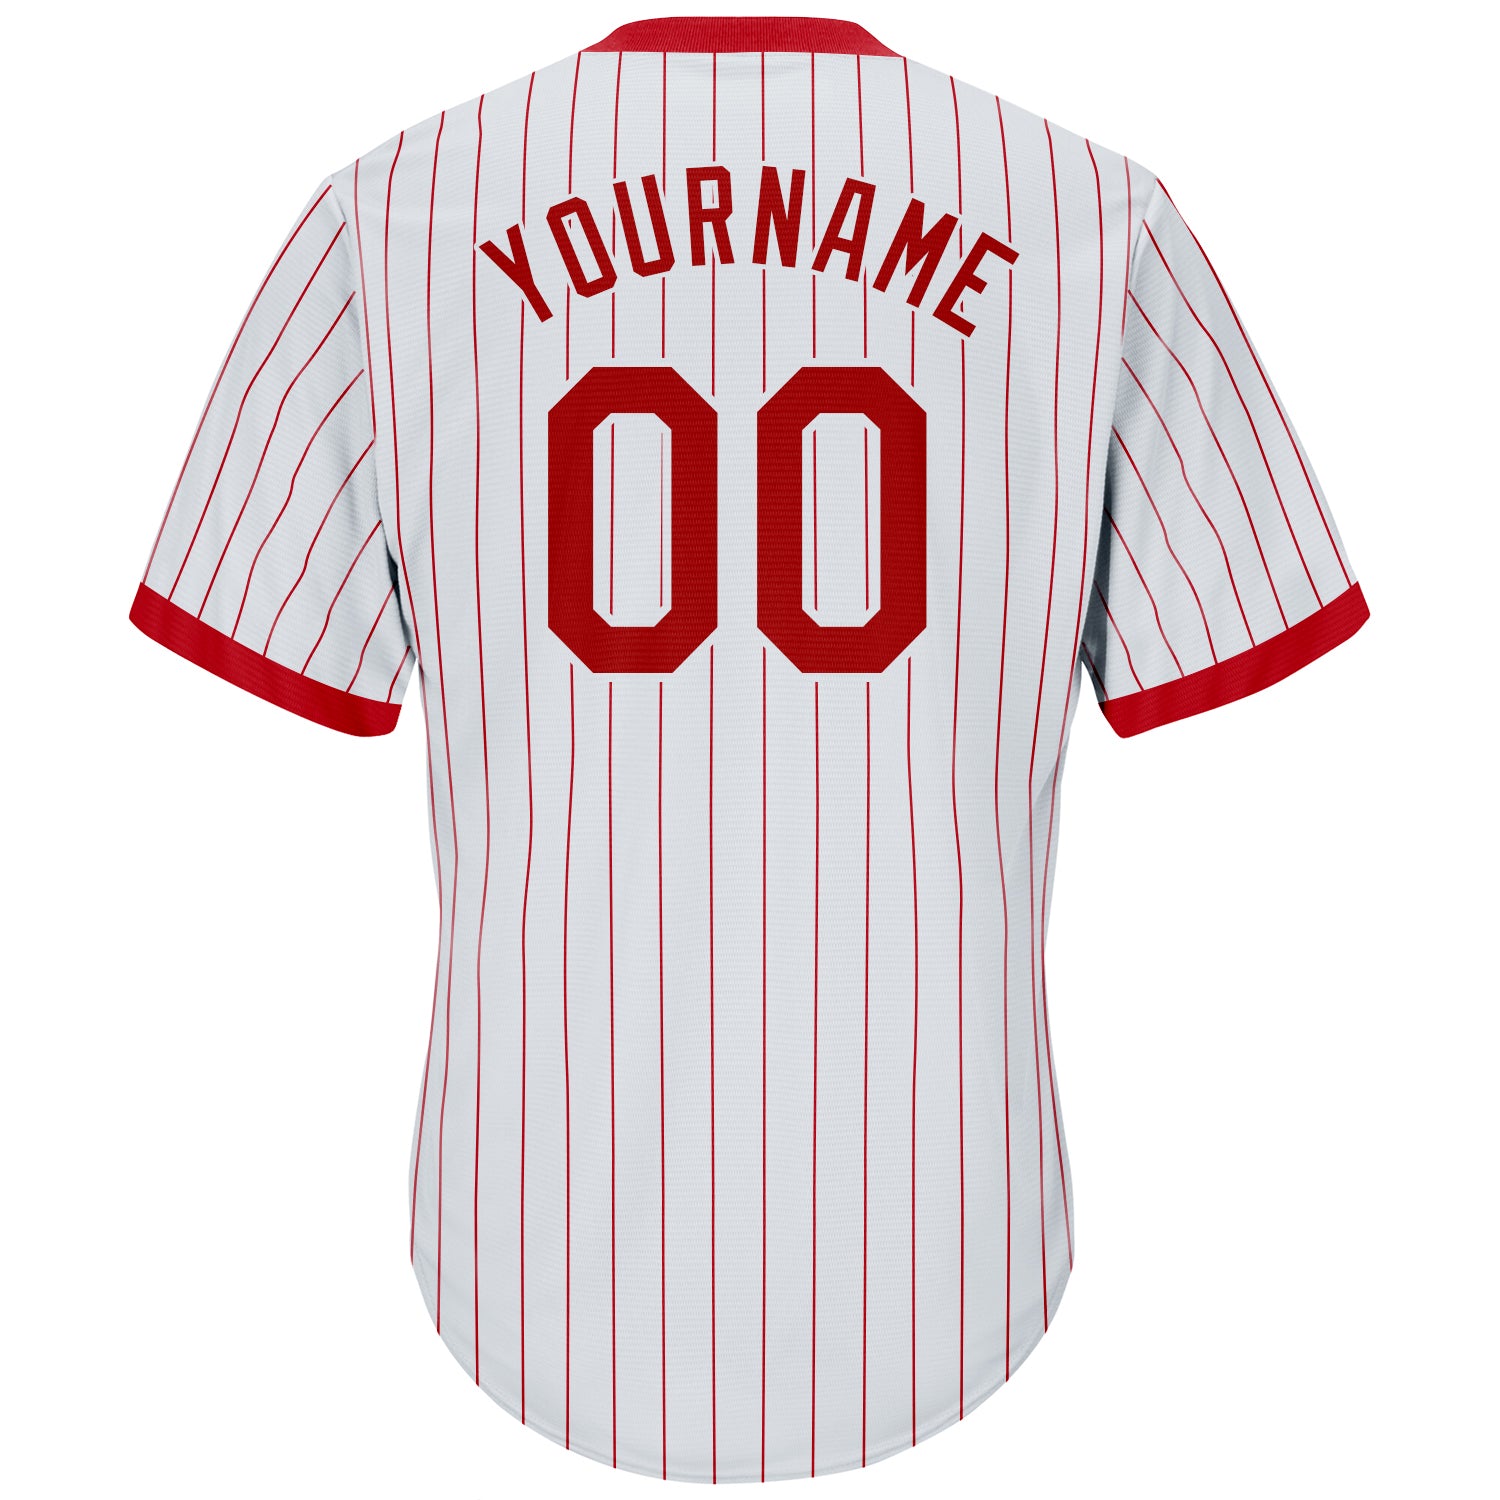 white and red mlb jersey